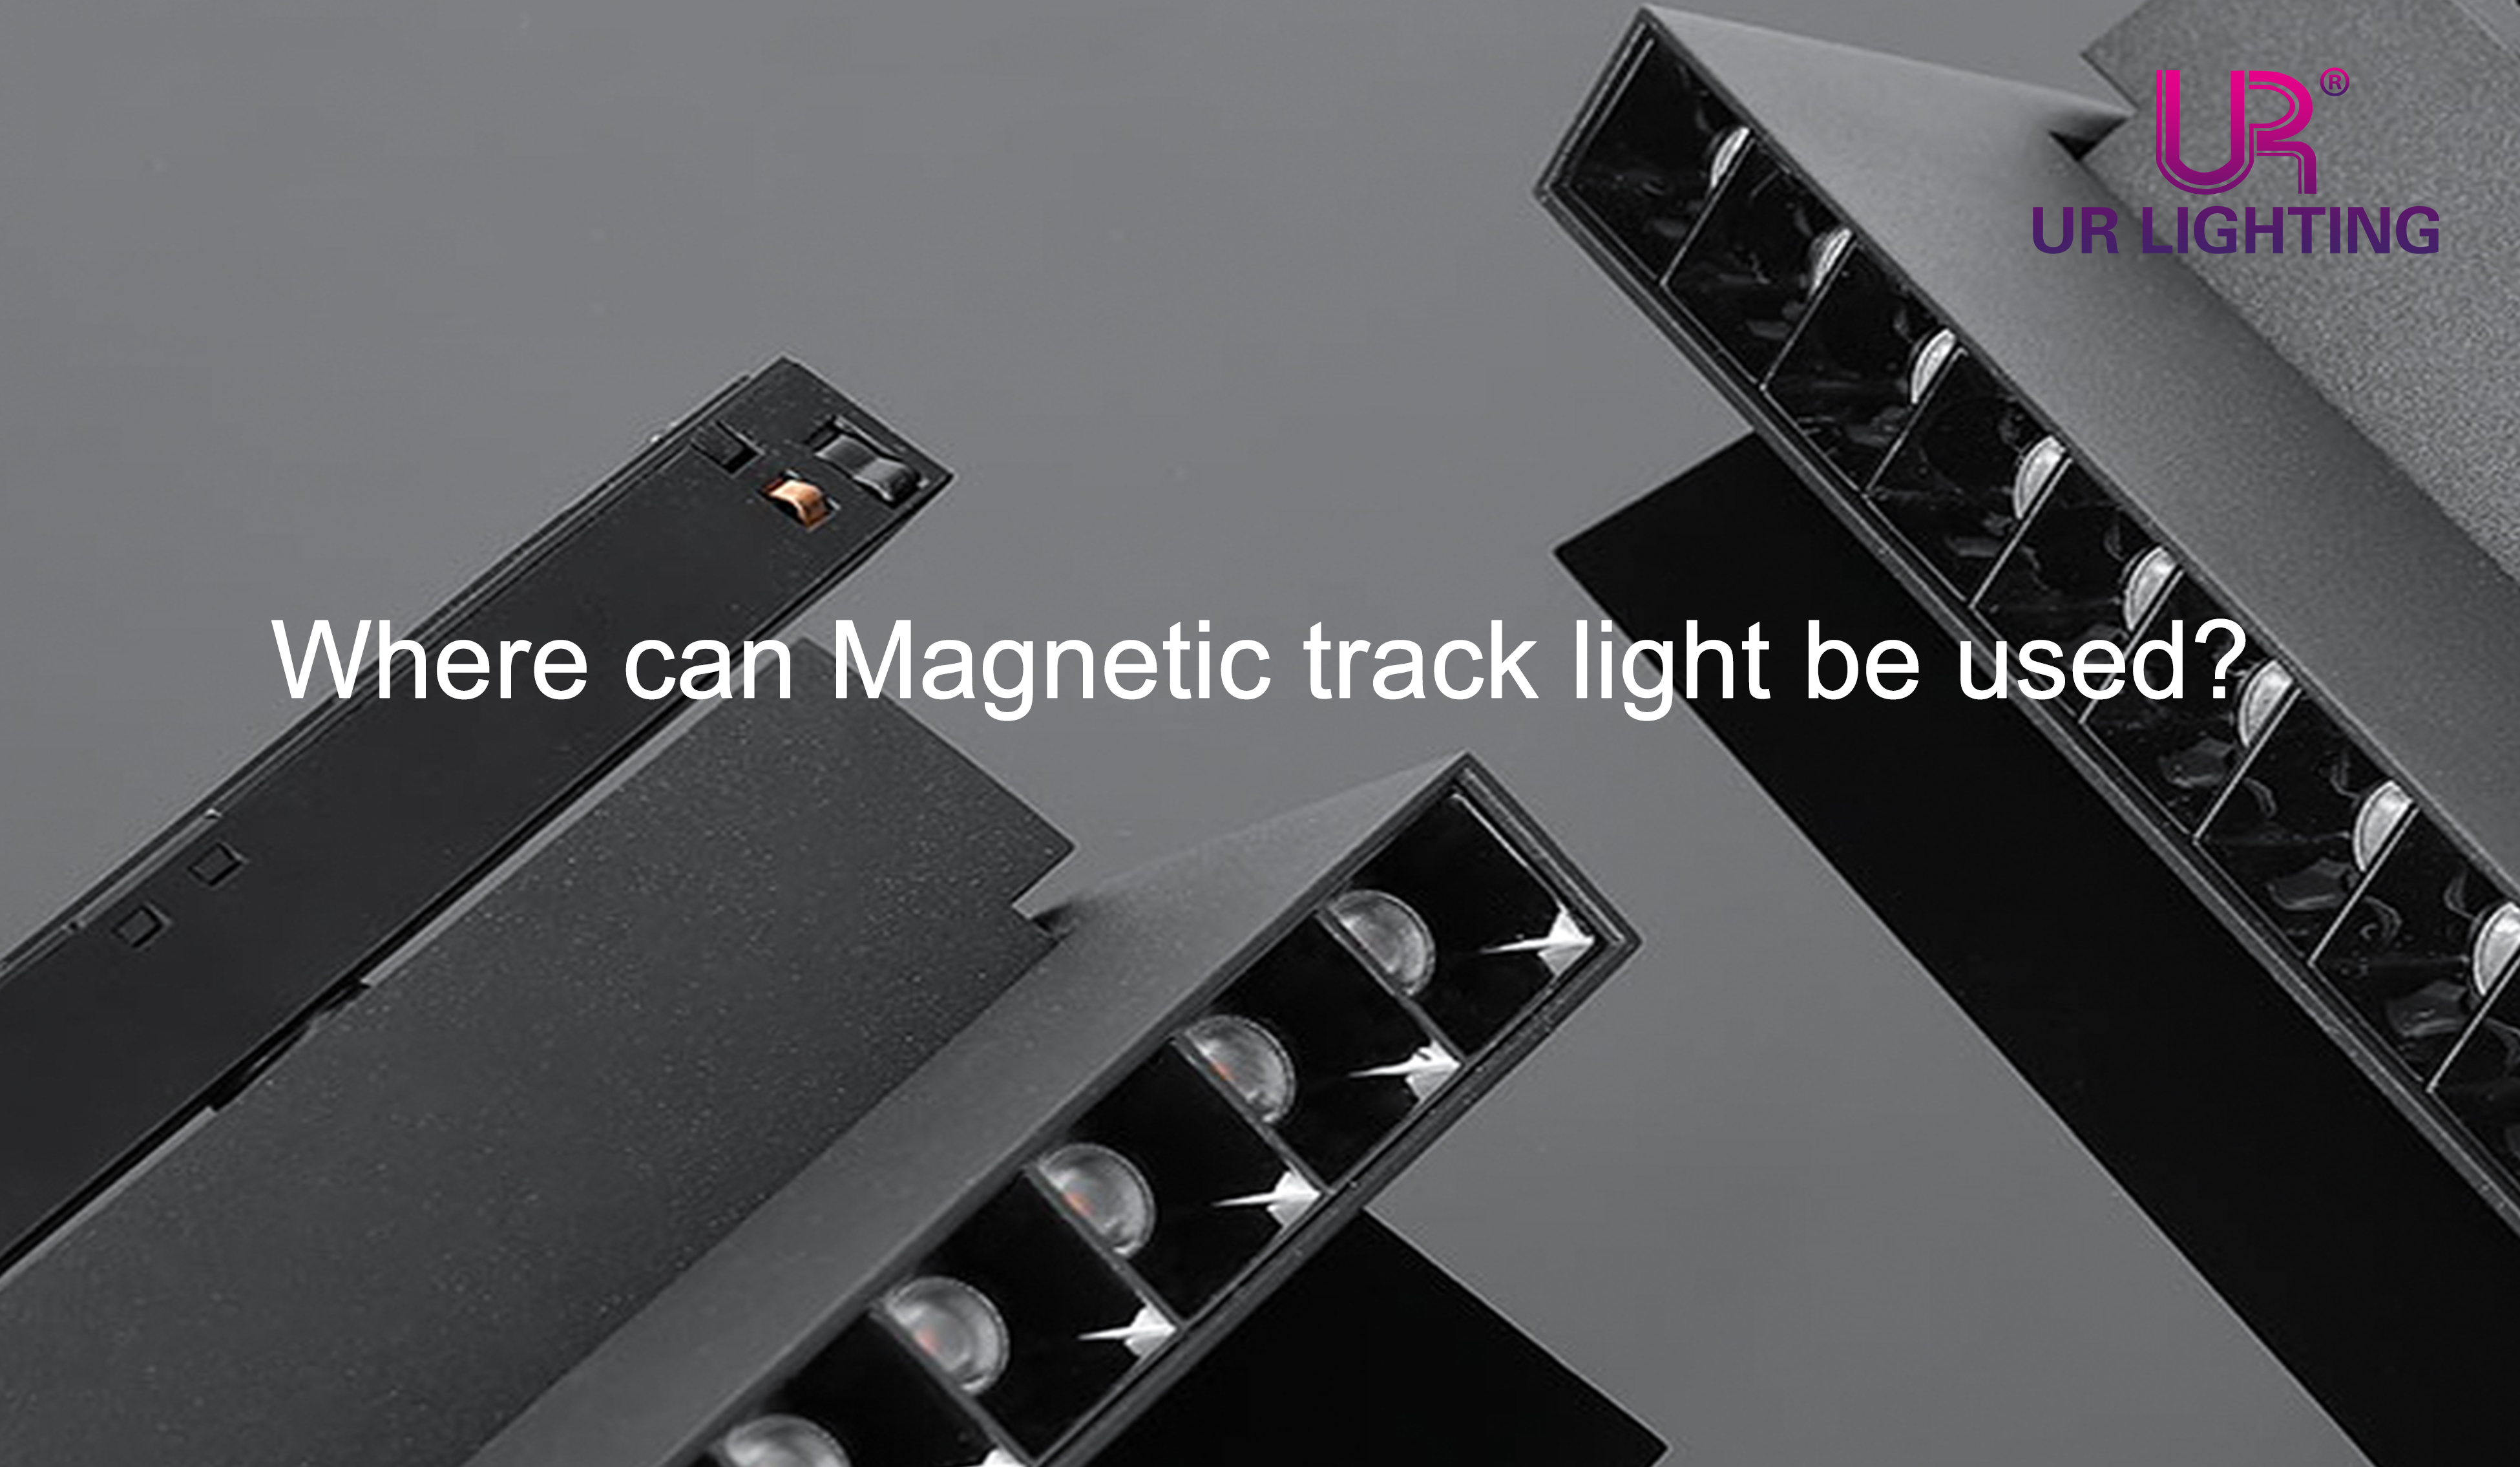 Where can Magnetic track light be used?